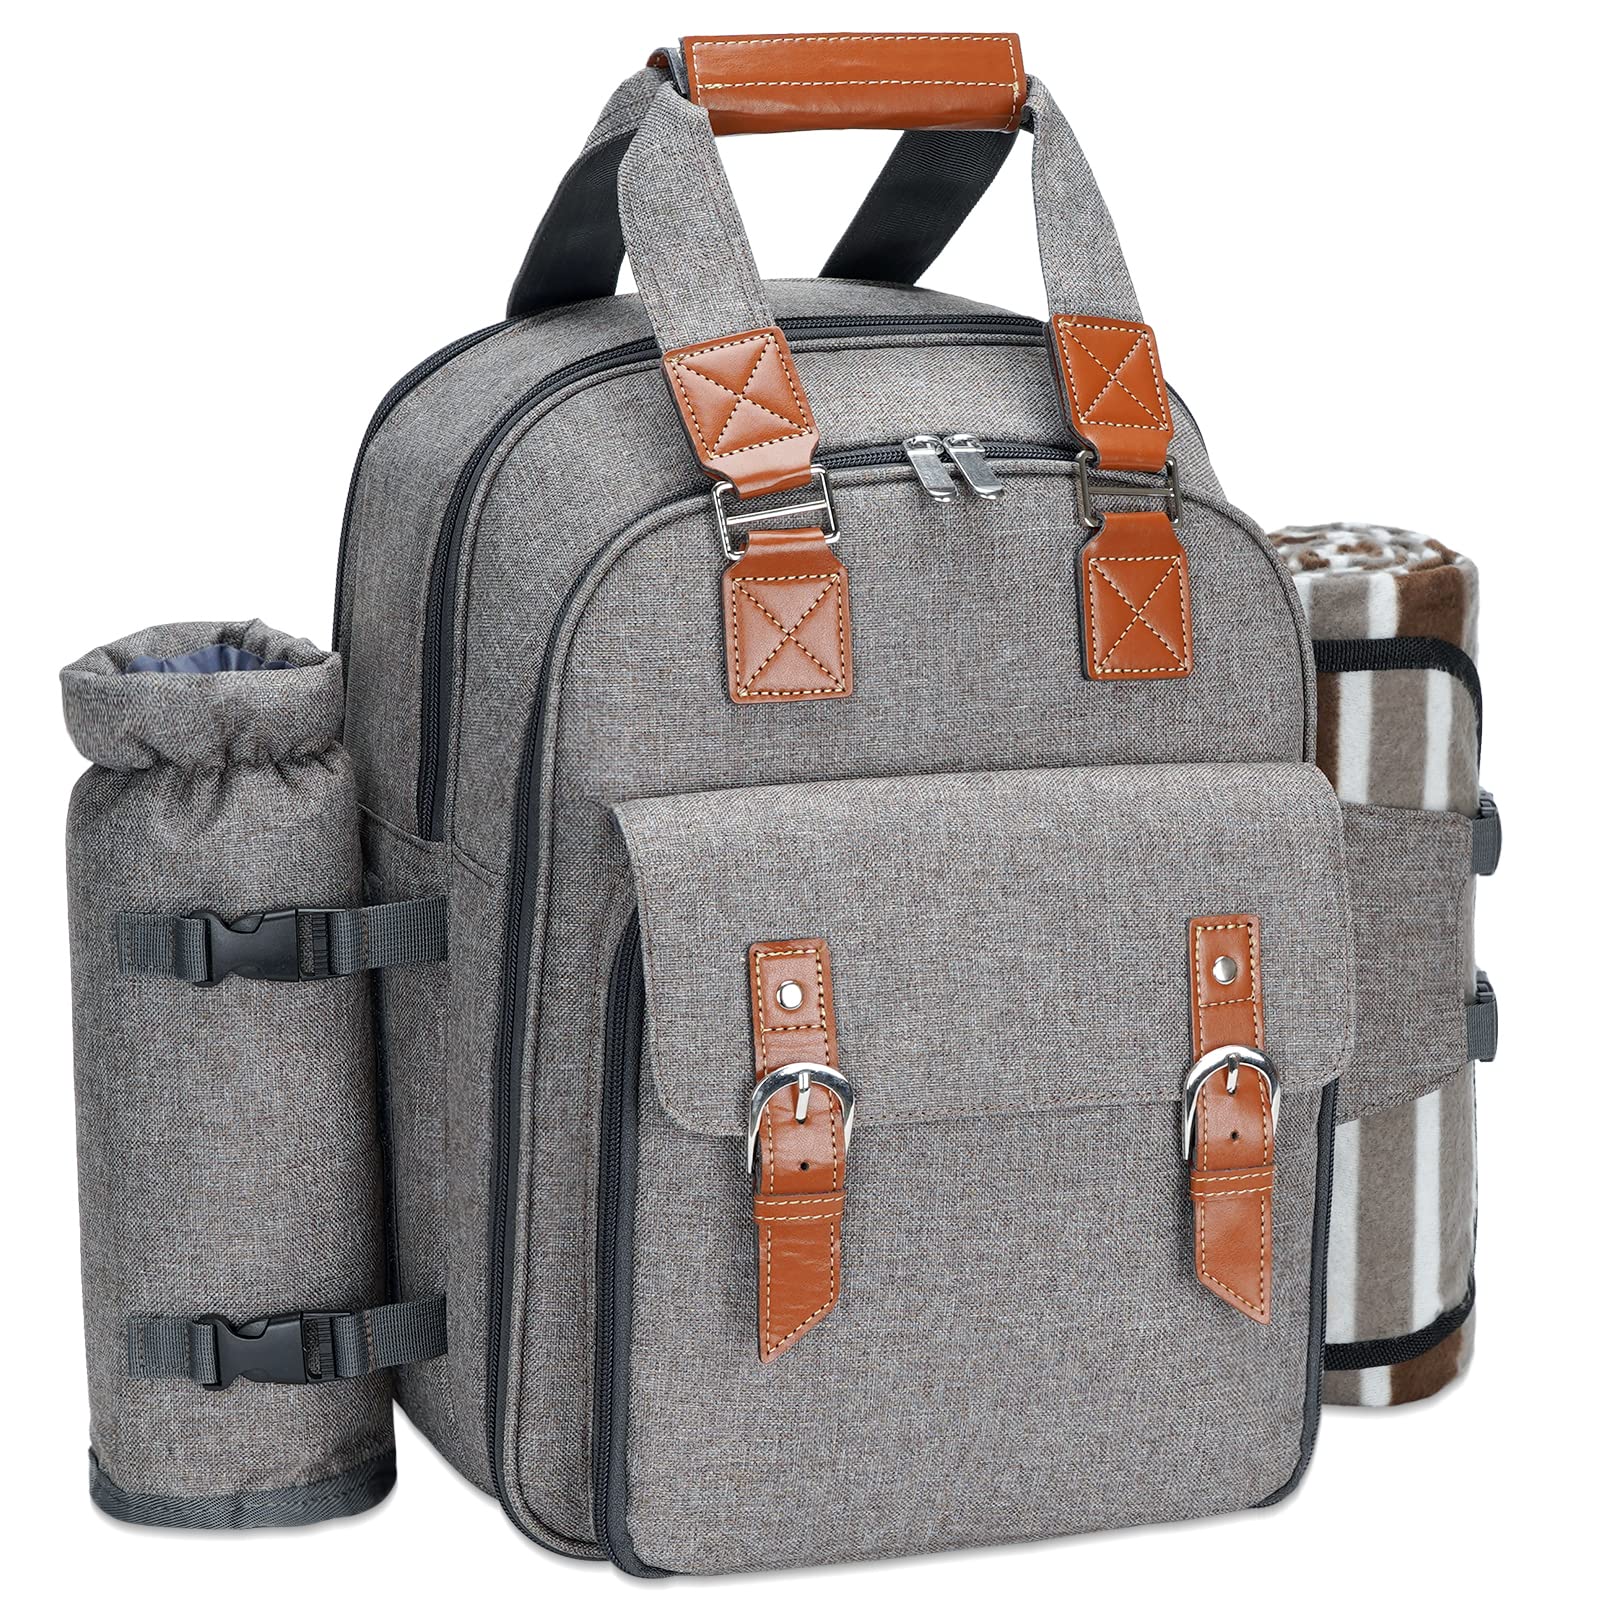 Picnic Backpack Bag (2 Person): Gift Idea For Adult, Birthday